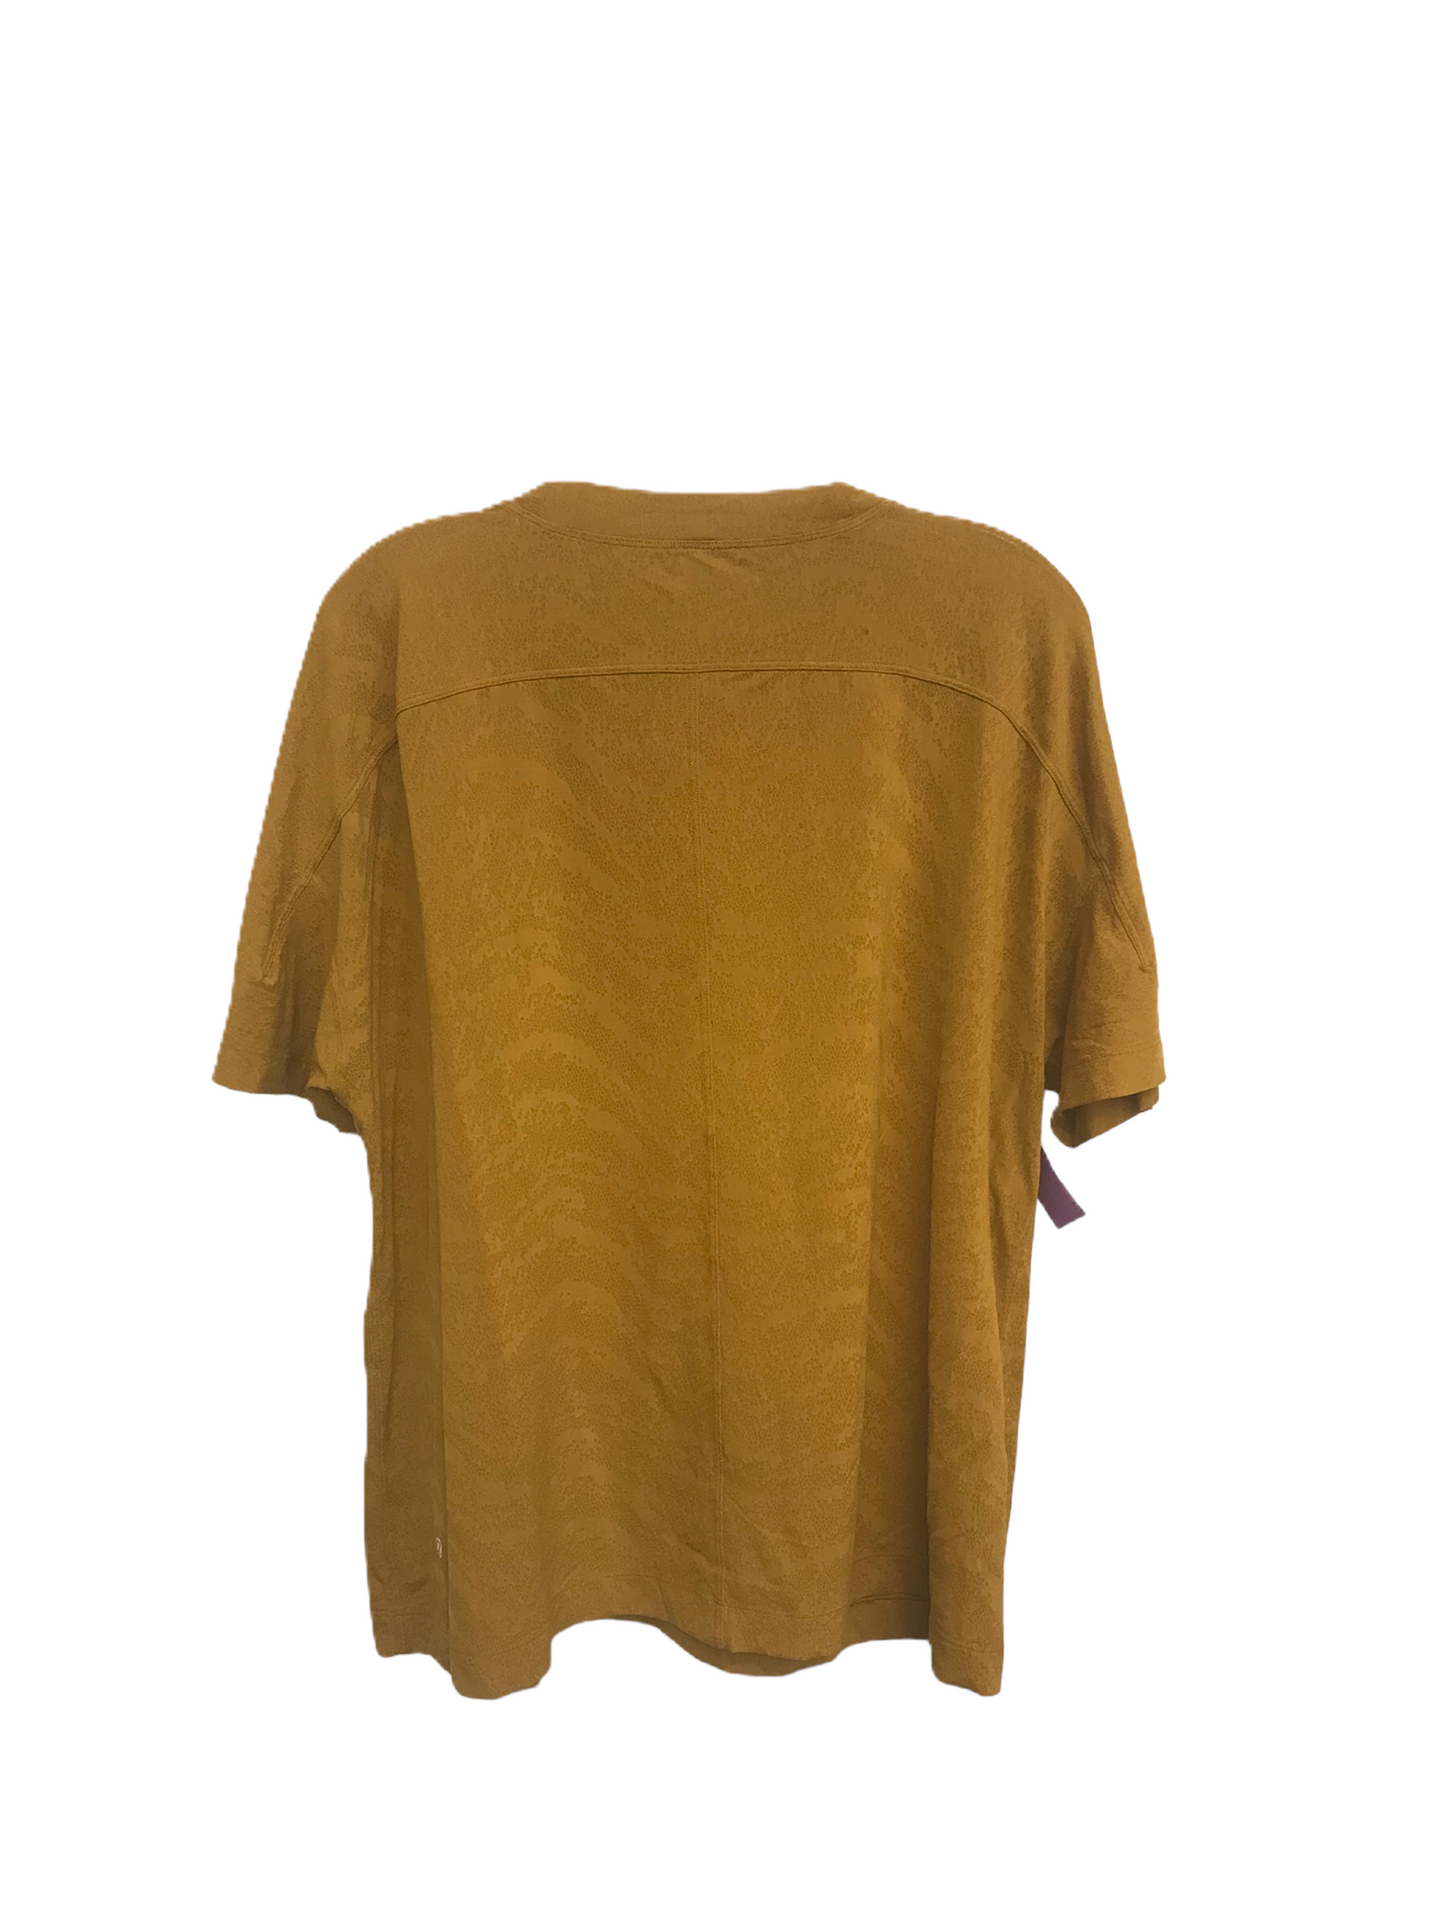 Yellow Athletic Top Short Sleeve By Lululemon, Size: S